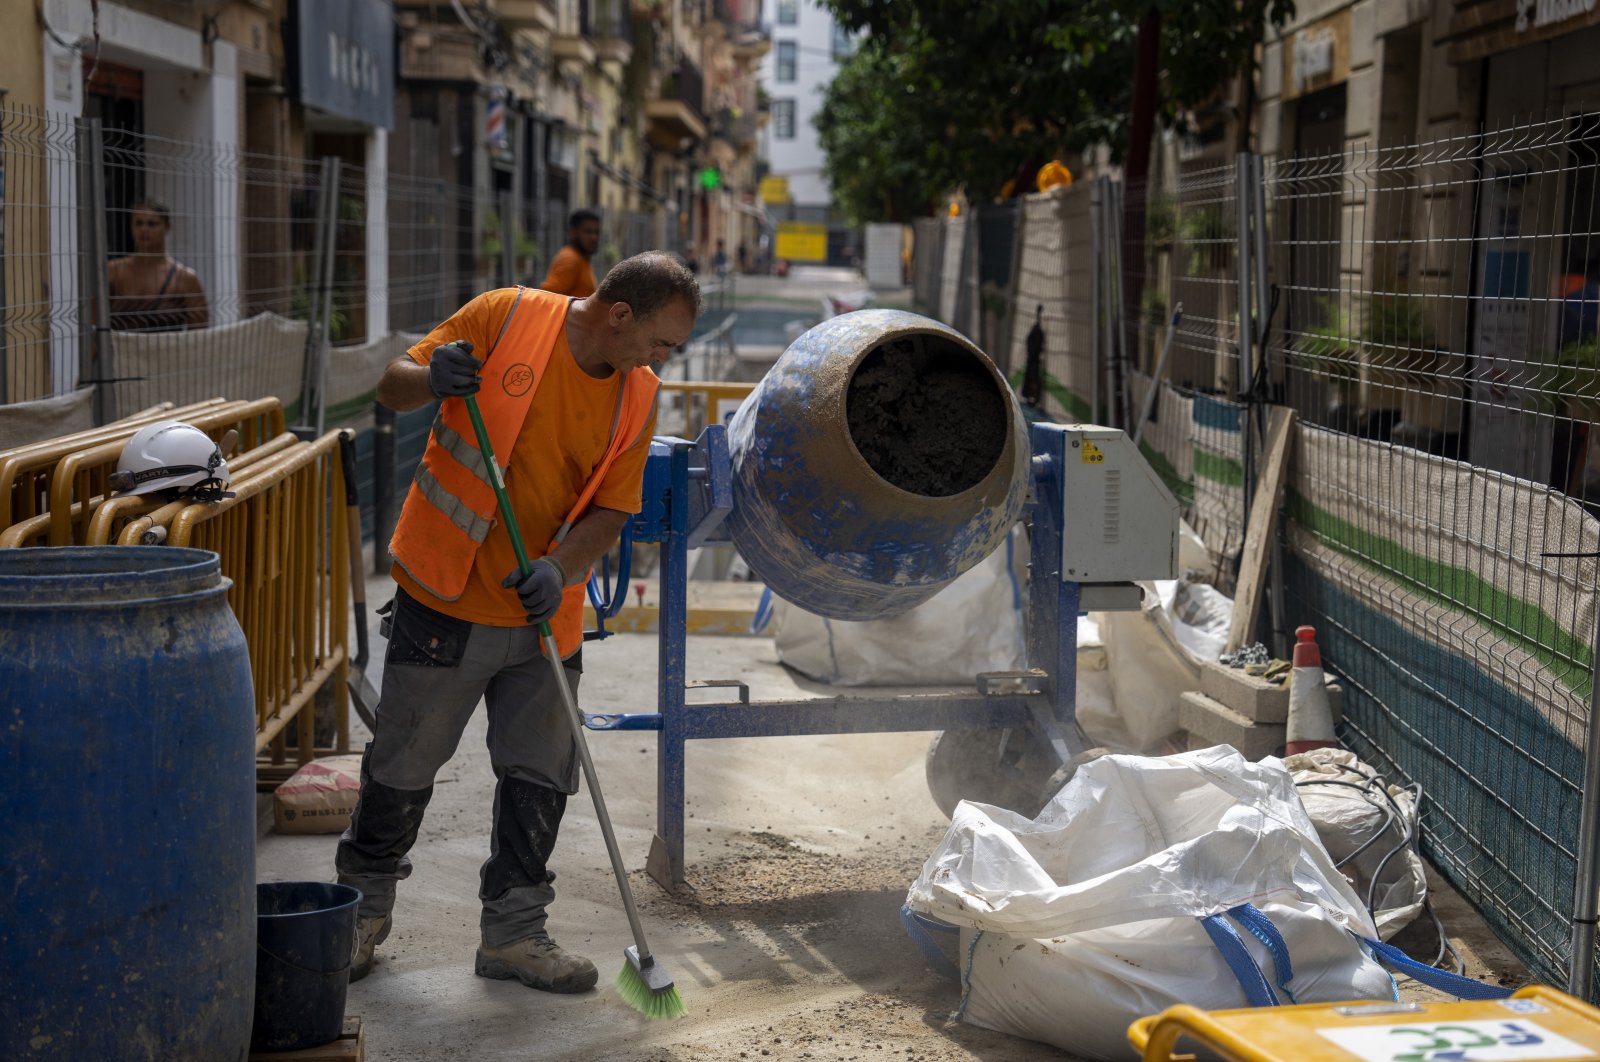 A construction worker cleans the pavement while rehabilitating a street in Barcelona, Spain, Wednesday, July 20, 2022. (AP Photo)